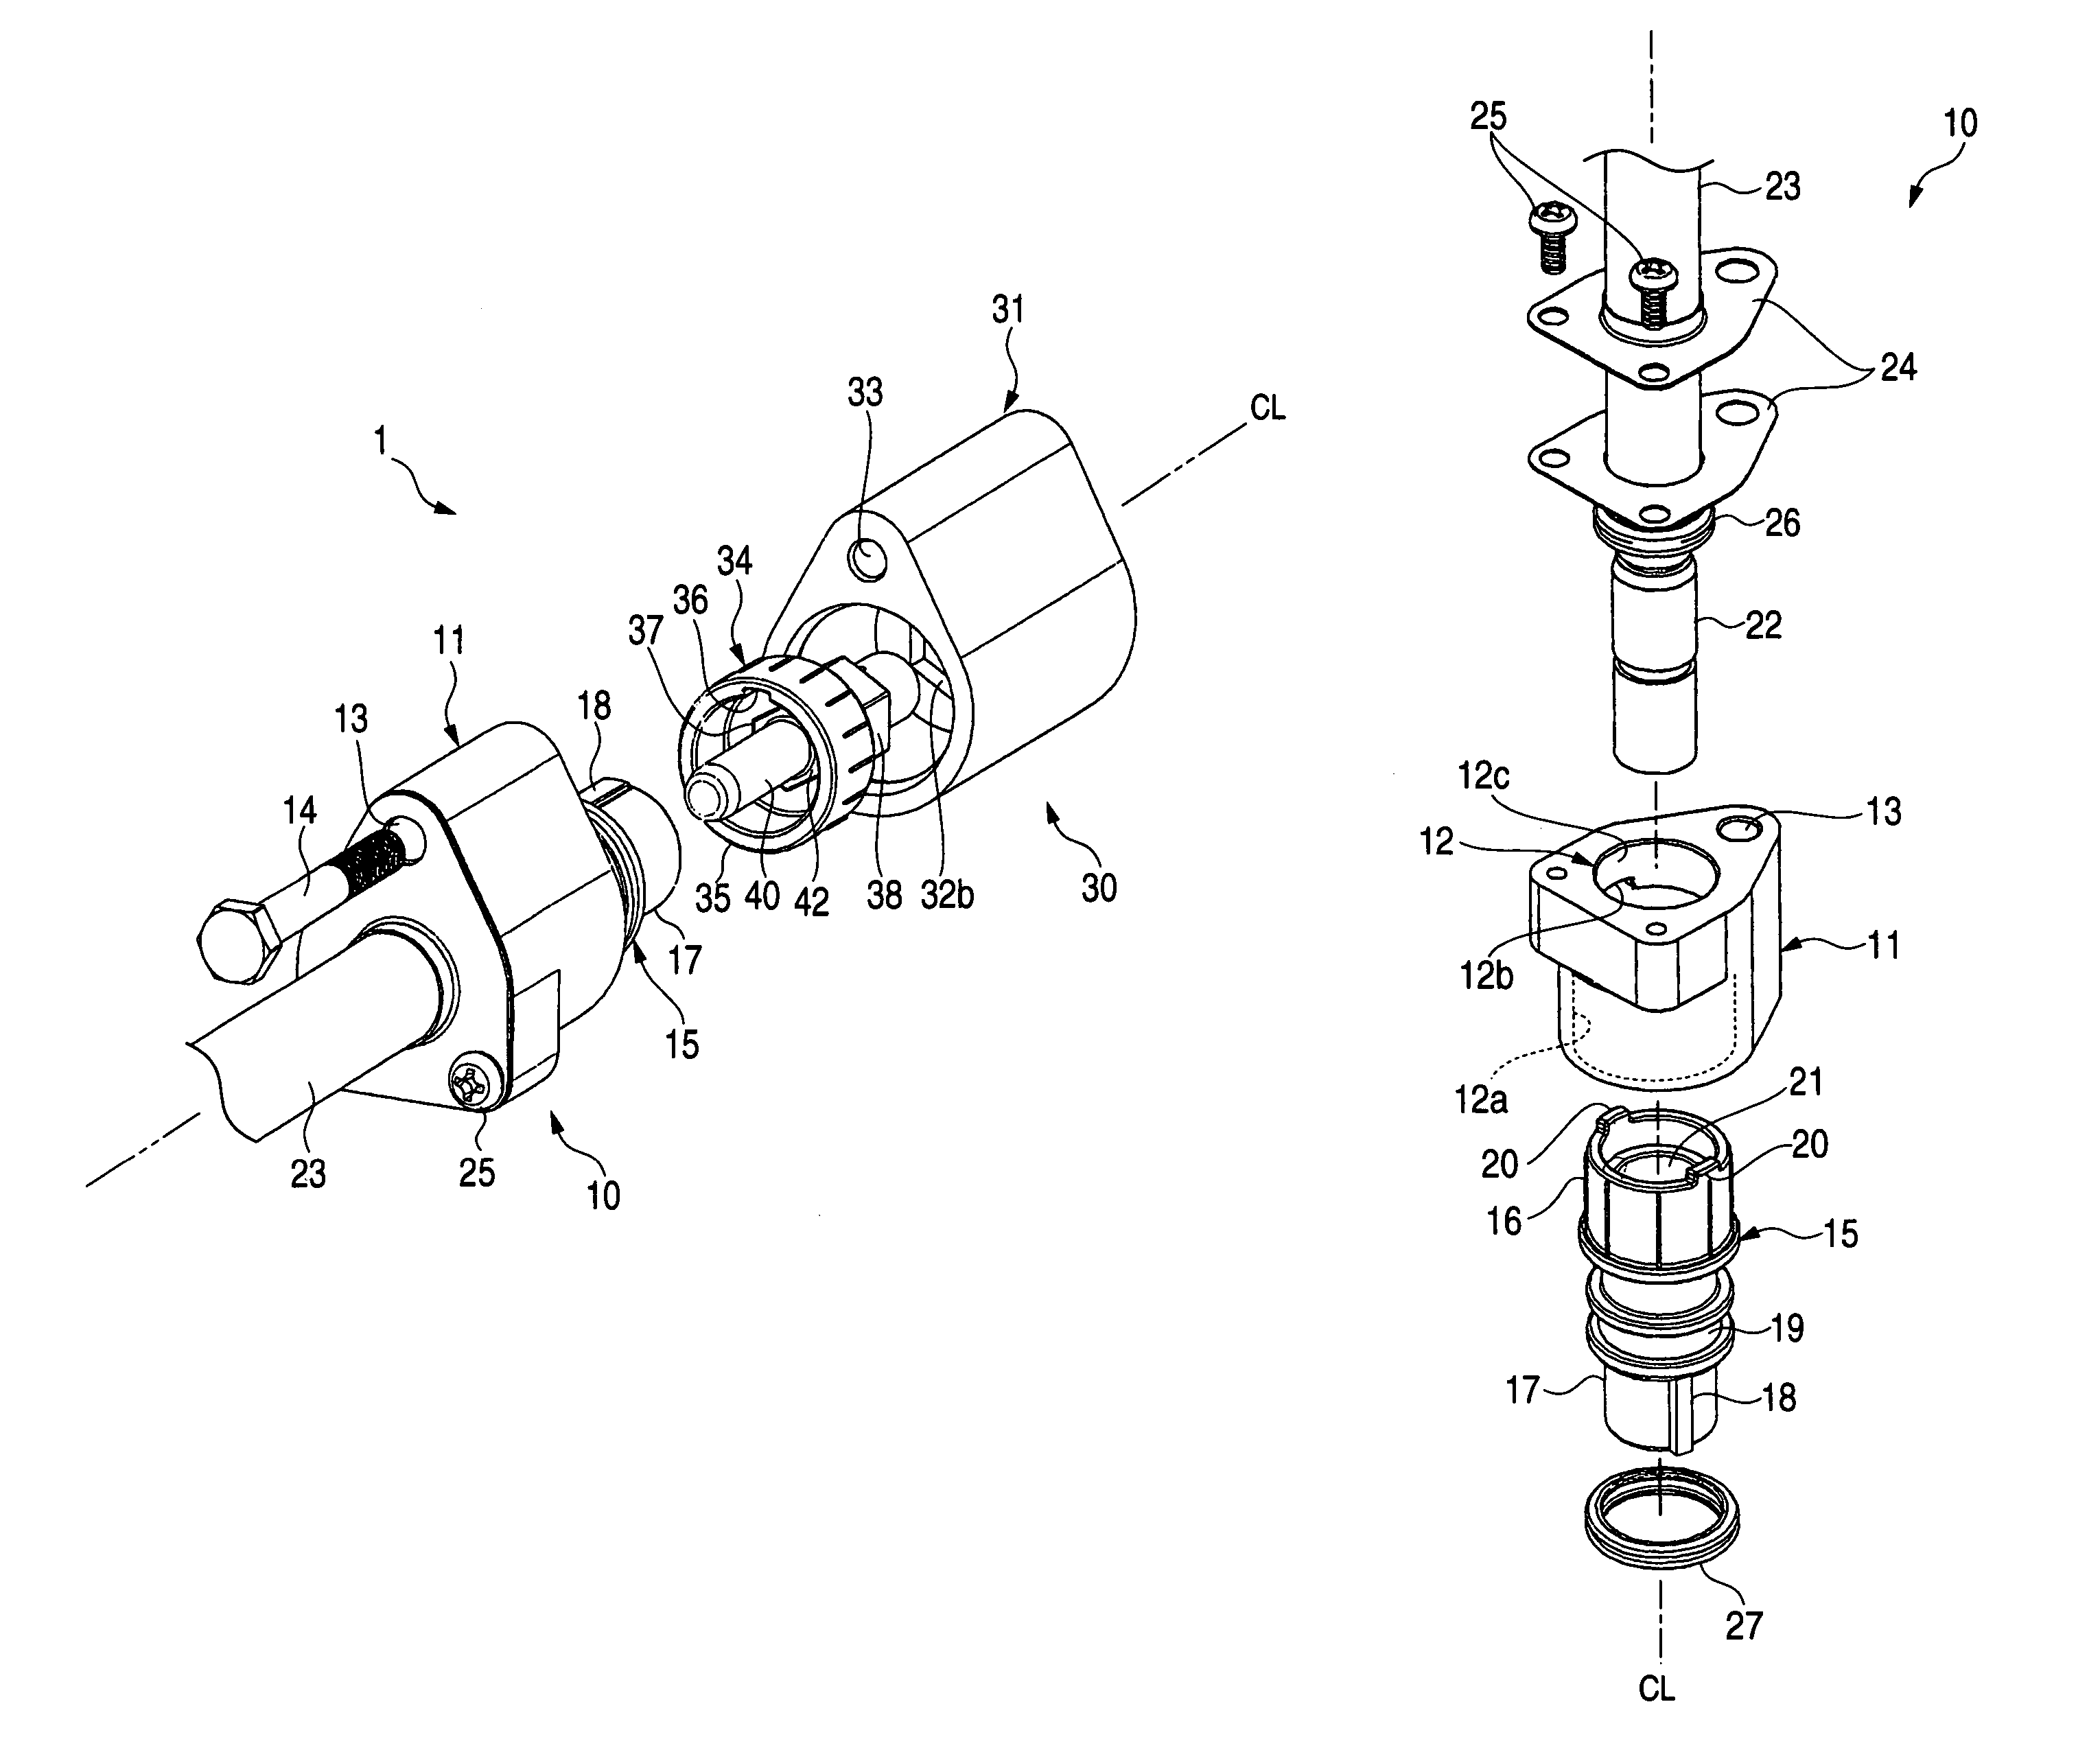 Female-male connector fitting structure